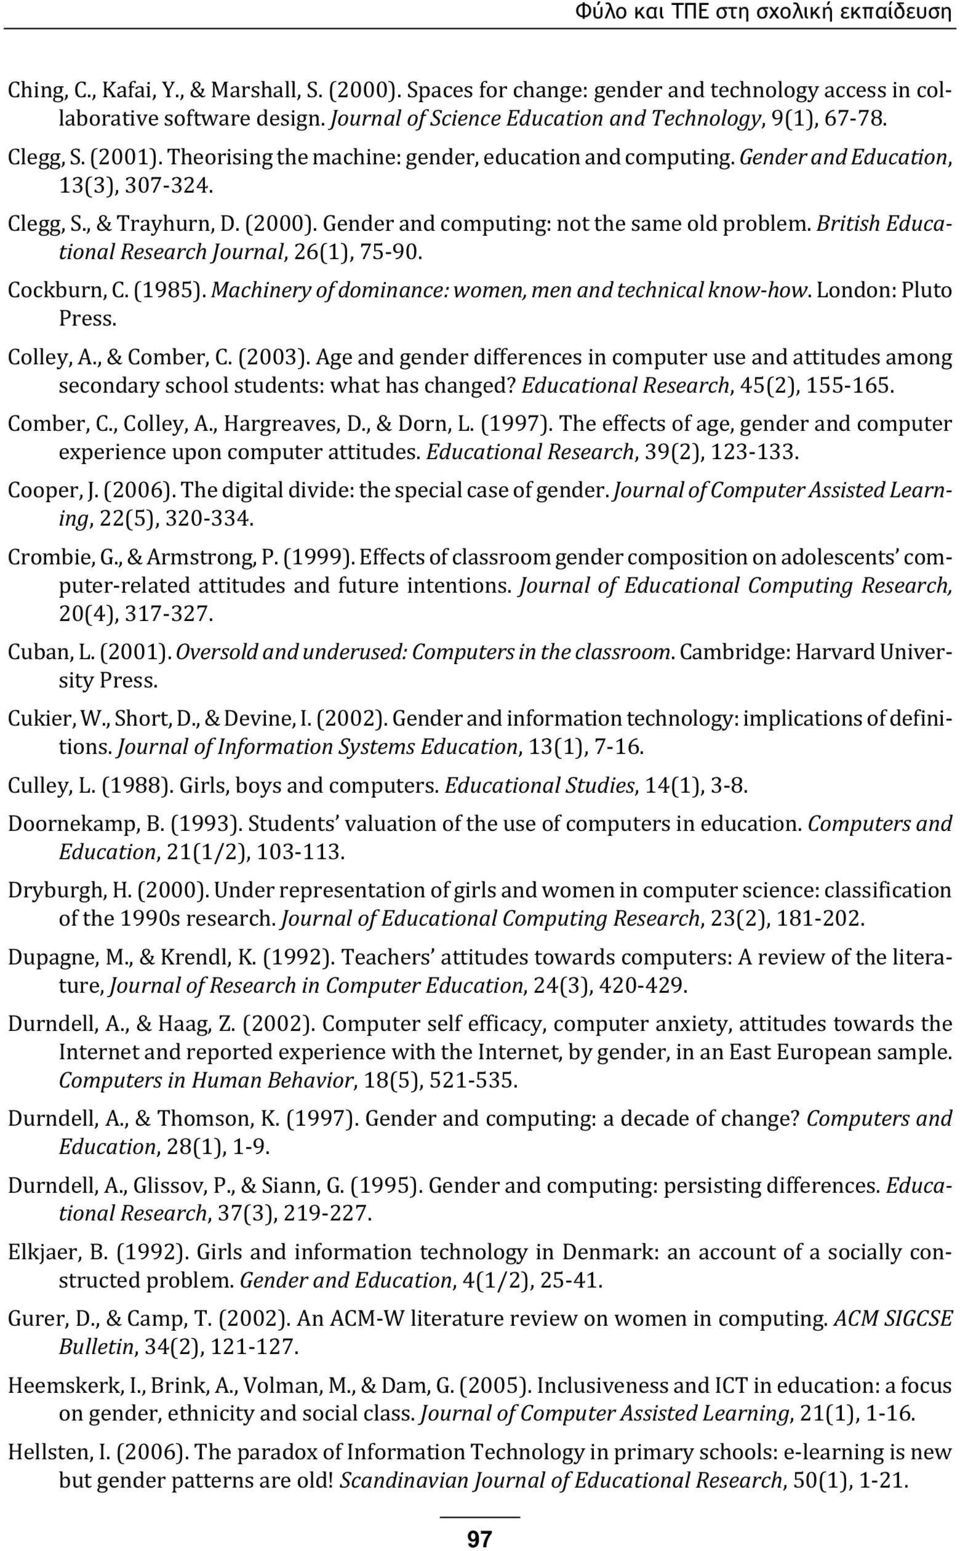 (2000). Gender and computing: not the same old problem. British Educational Research Journal, 26(1), 75-90. Cockburn, C. (1985). Machinery of dominance: women, men and technical know-how.